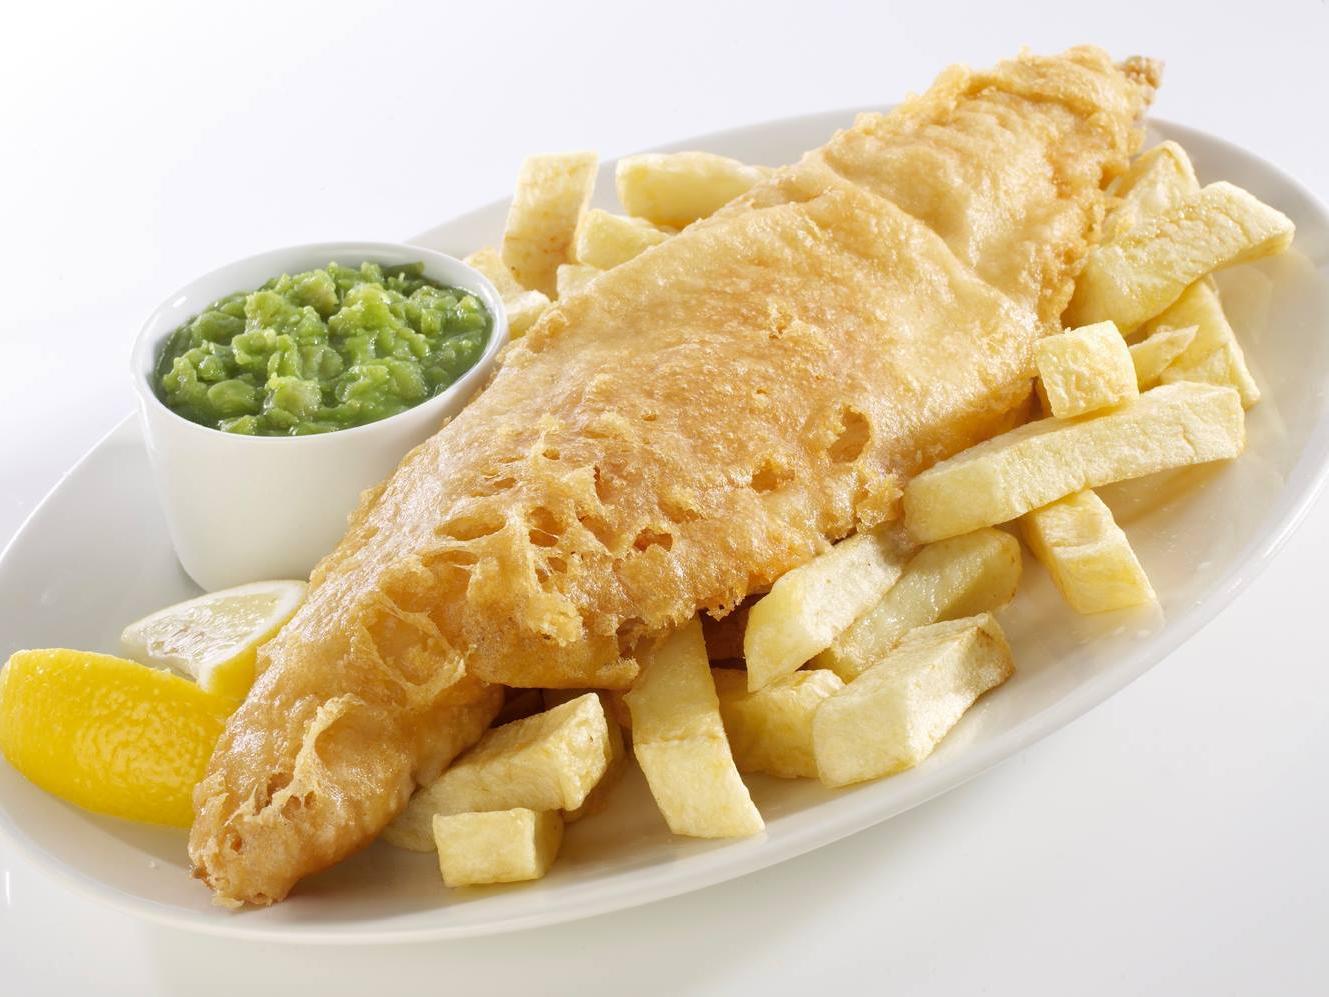 "I have been visiting Fillets Mansfield every week for the past 8 years and it is without doubt the best fish and chip restaurant I have dined in." Unit a-B Fulmar Close, NG19 0GG